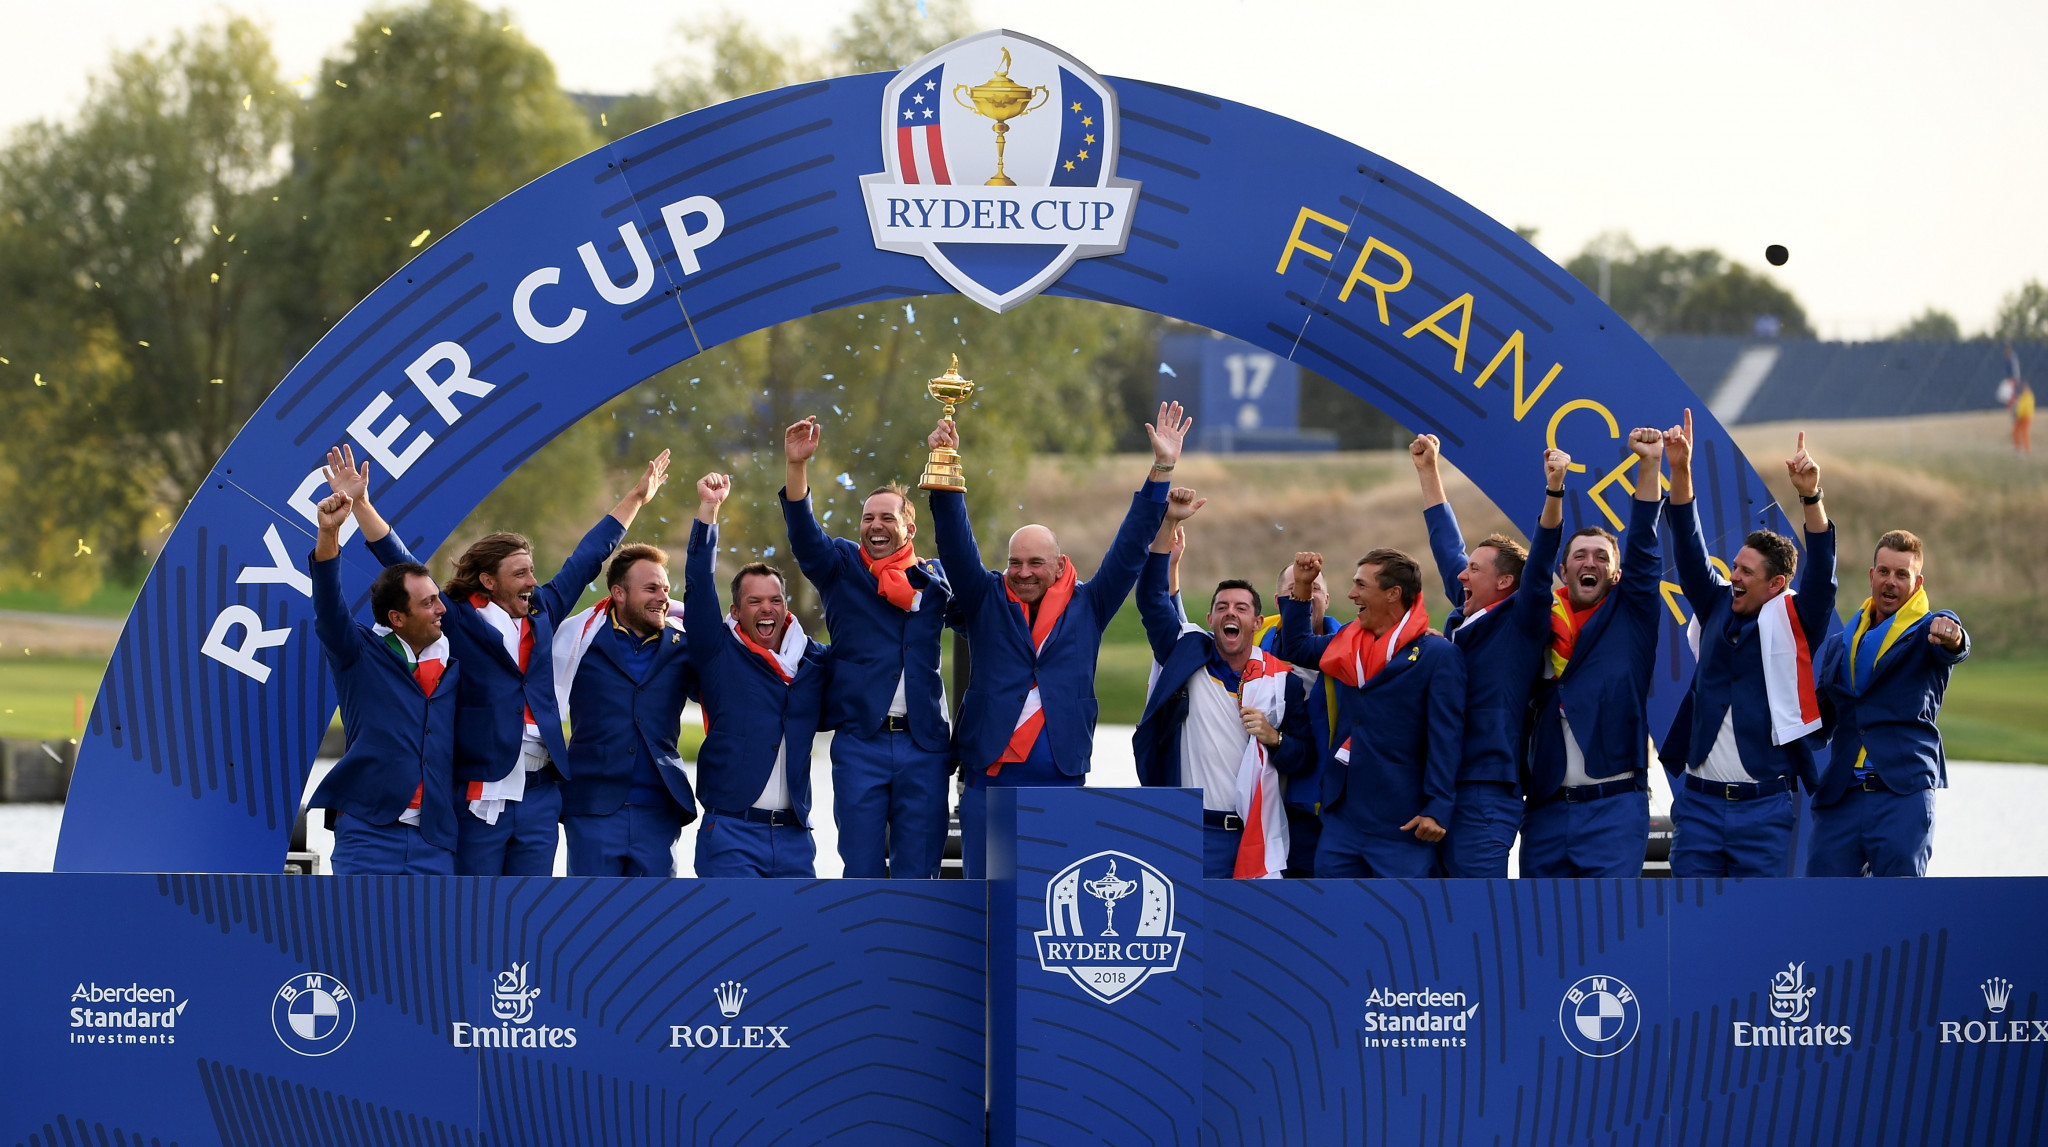 Postponement of Ryder Cup to 2021 tipped to be announced next week